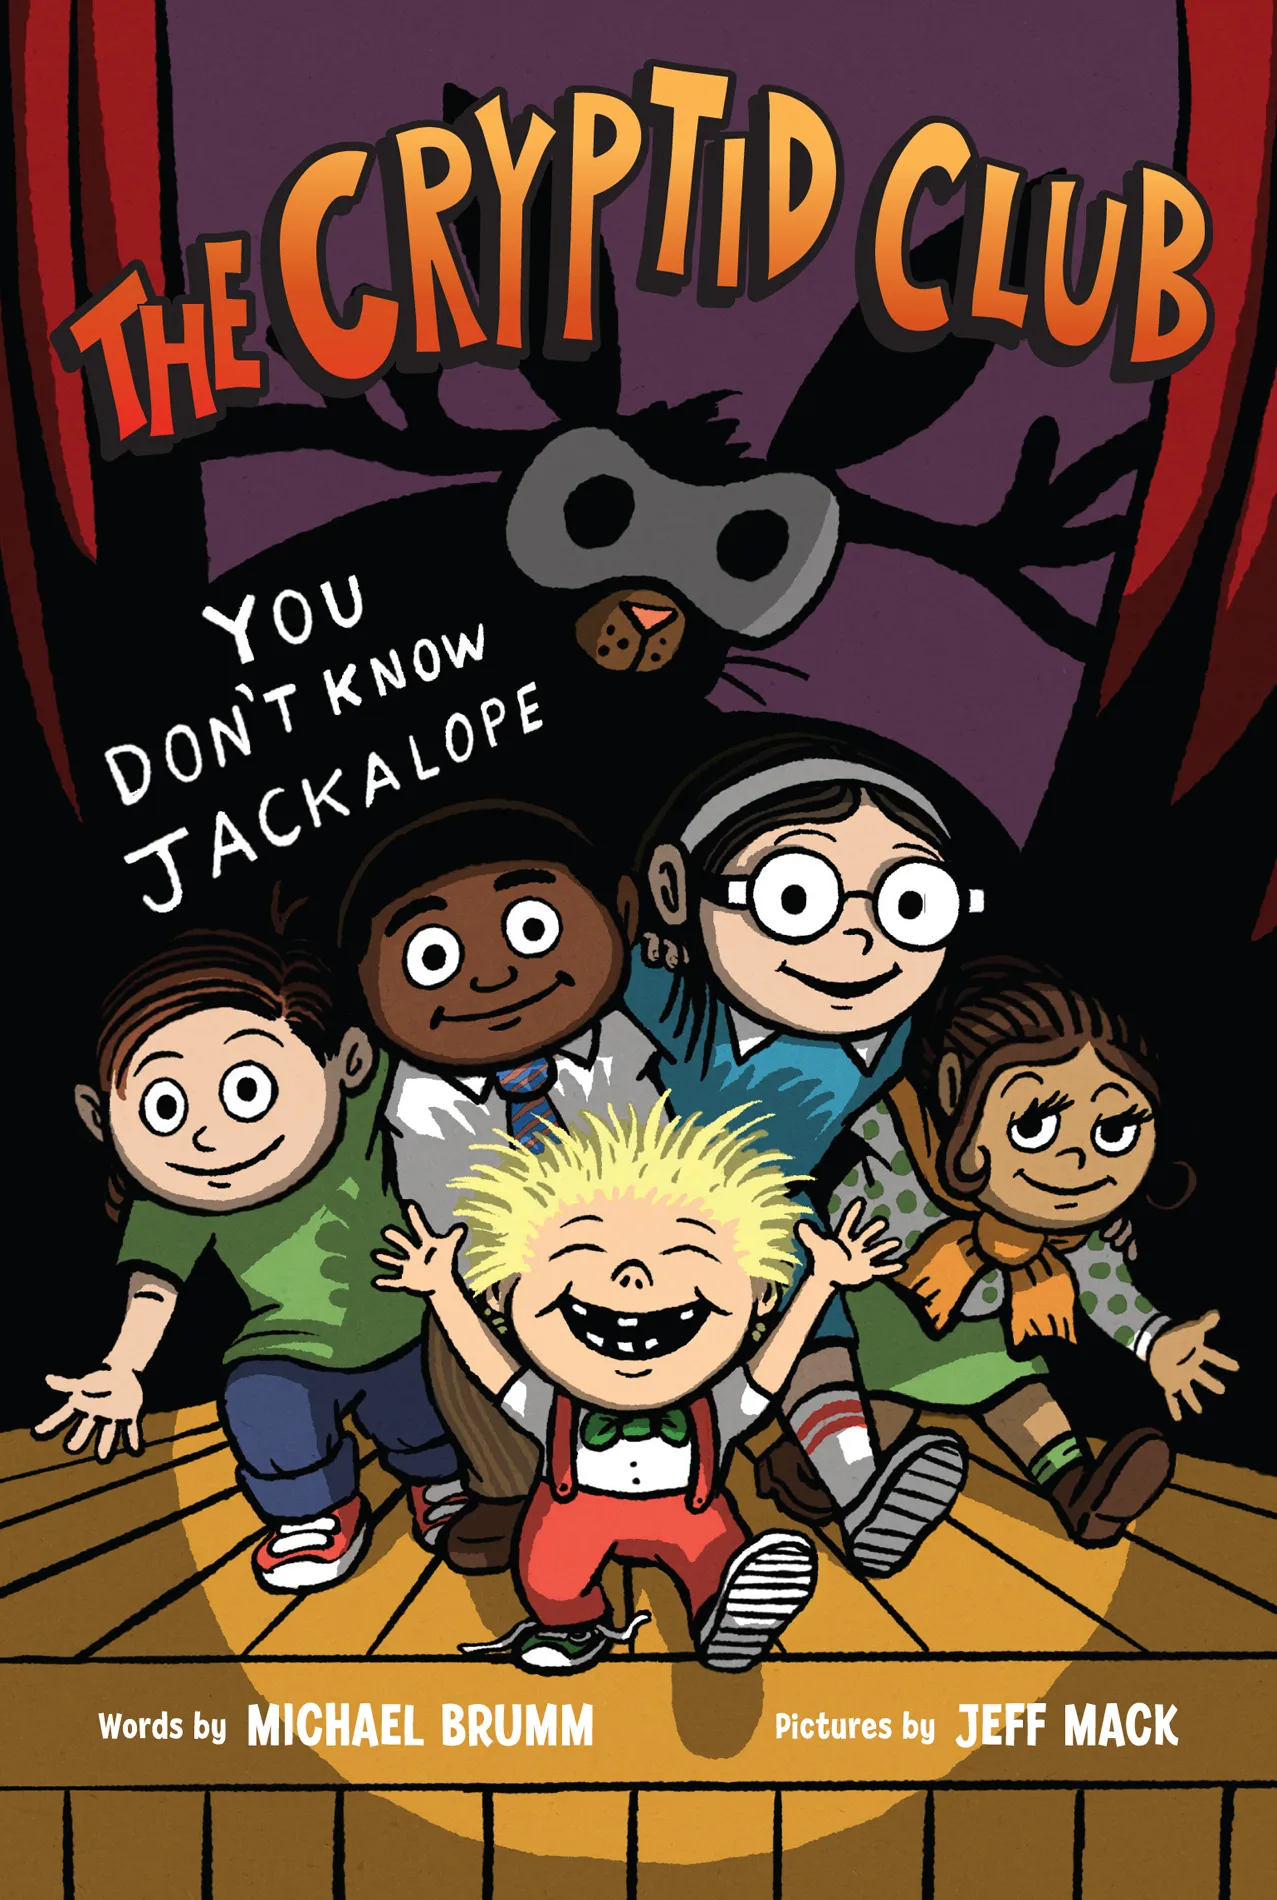 You Don't Know Jackalope (The Cryptid Club #4)